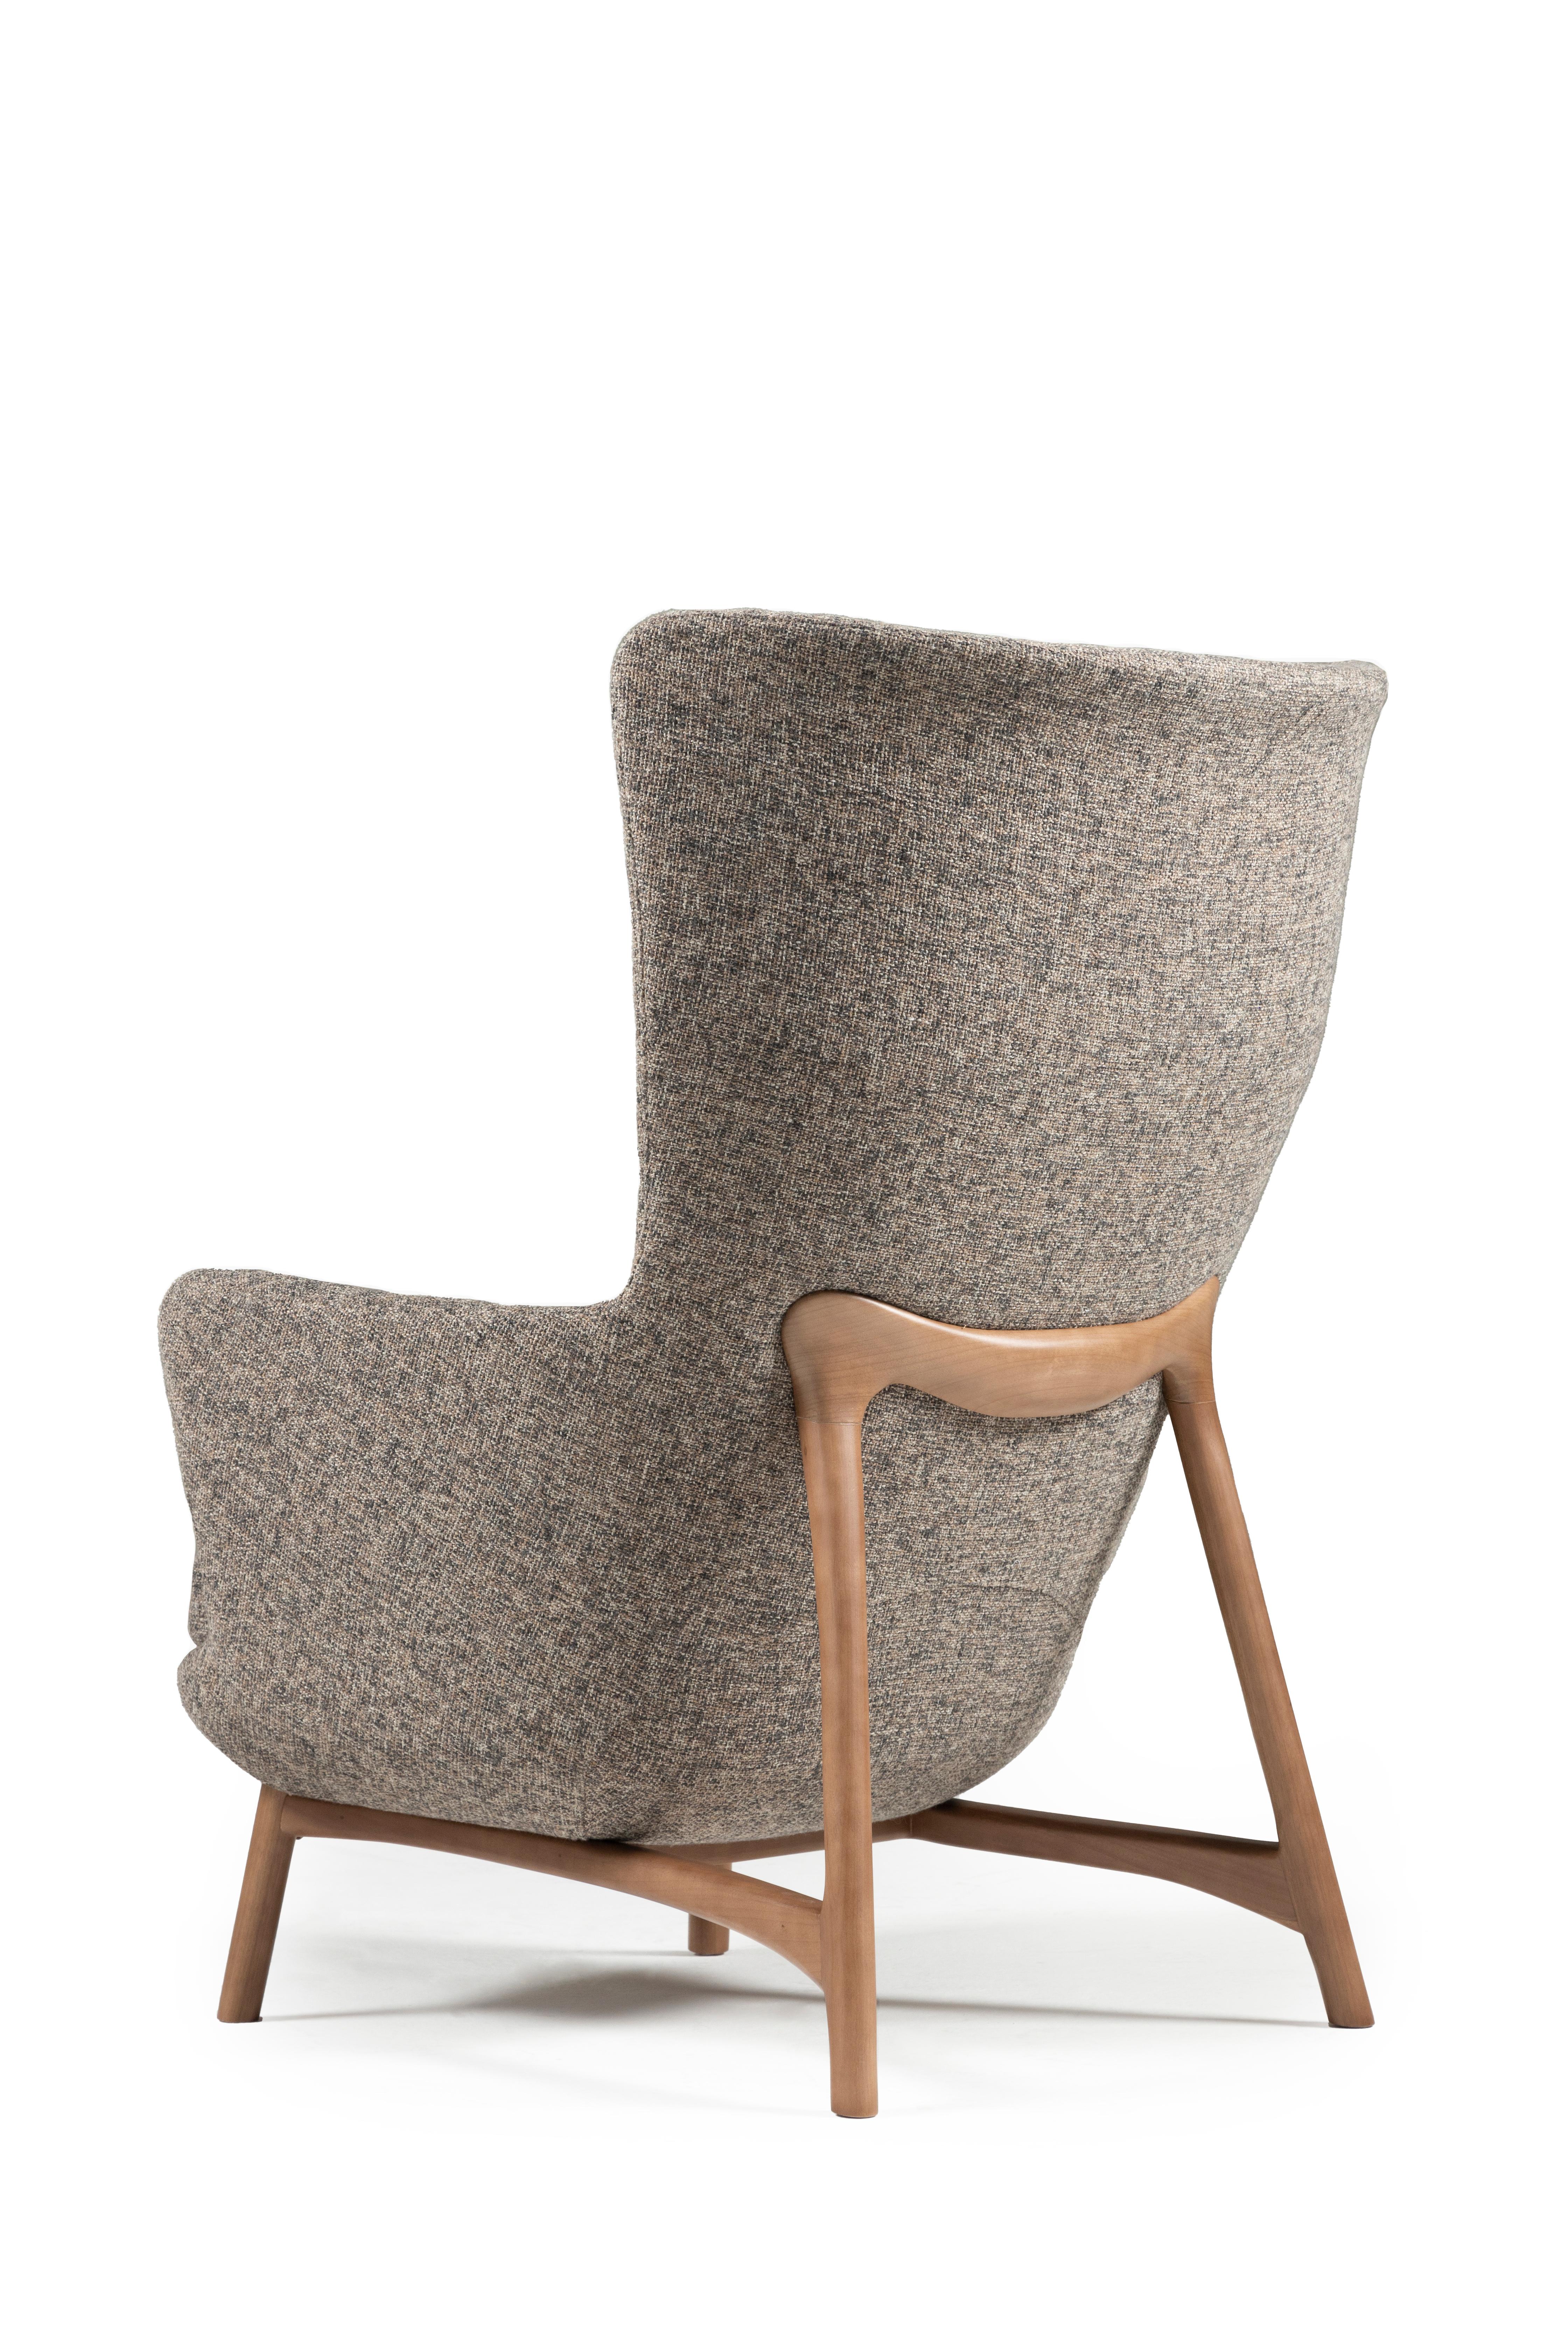 Brazilian Sublime High Armchairs, Contemporary Style in Solid Wood, Textiles Upholstery For Sale